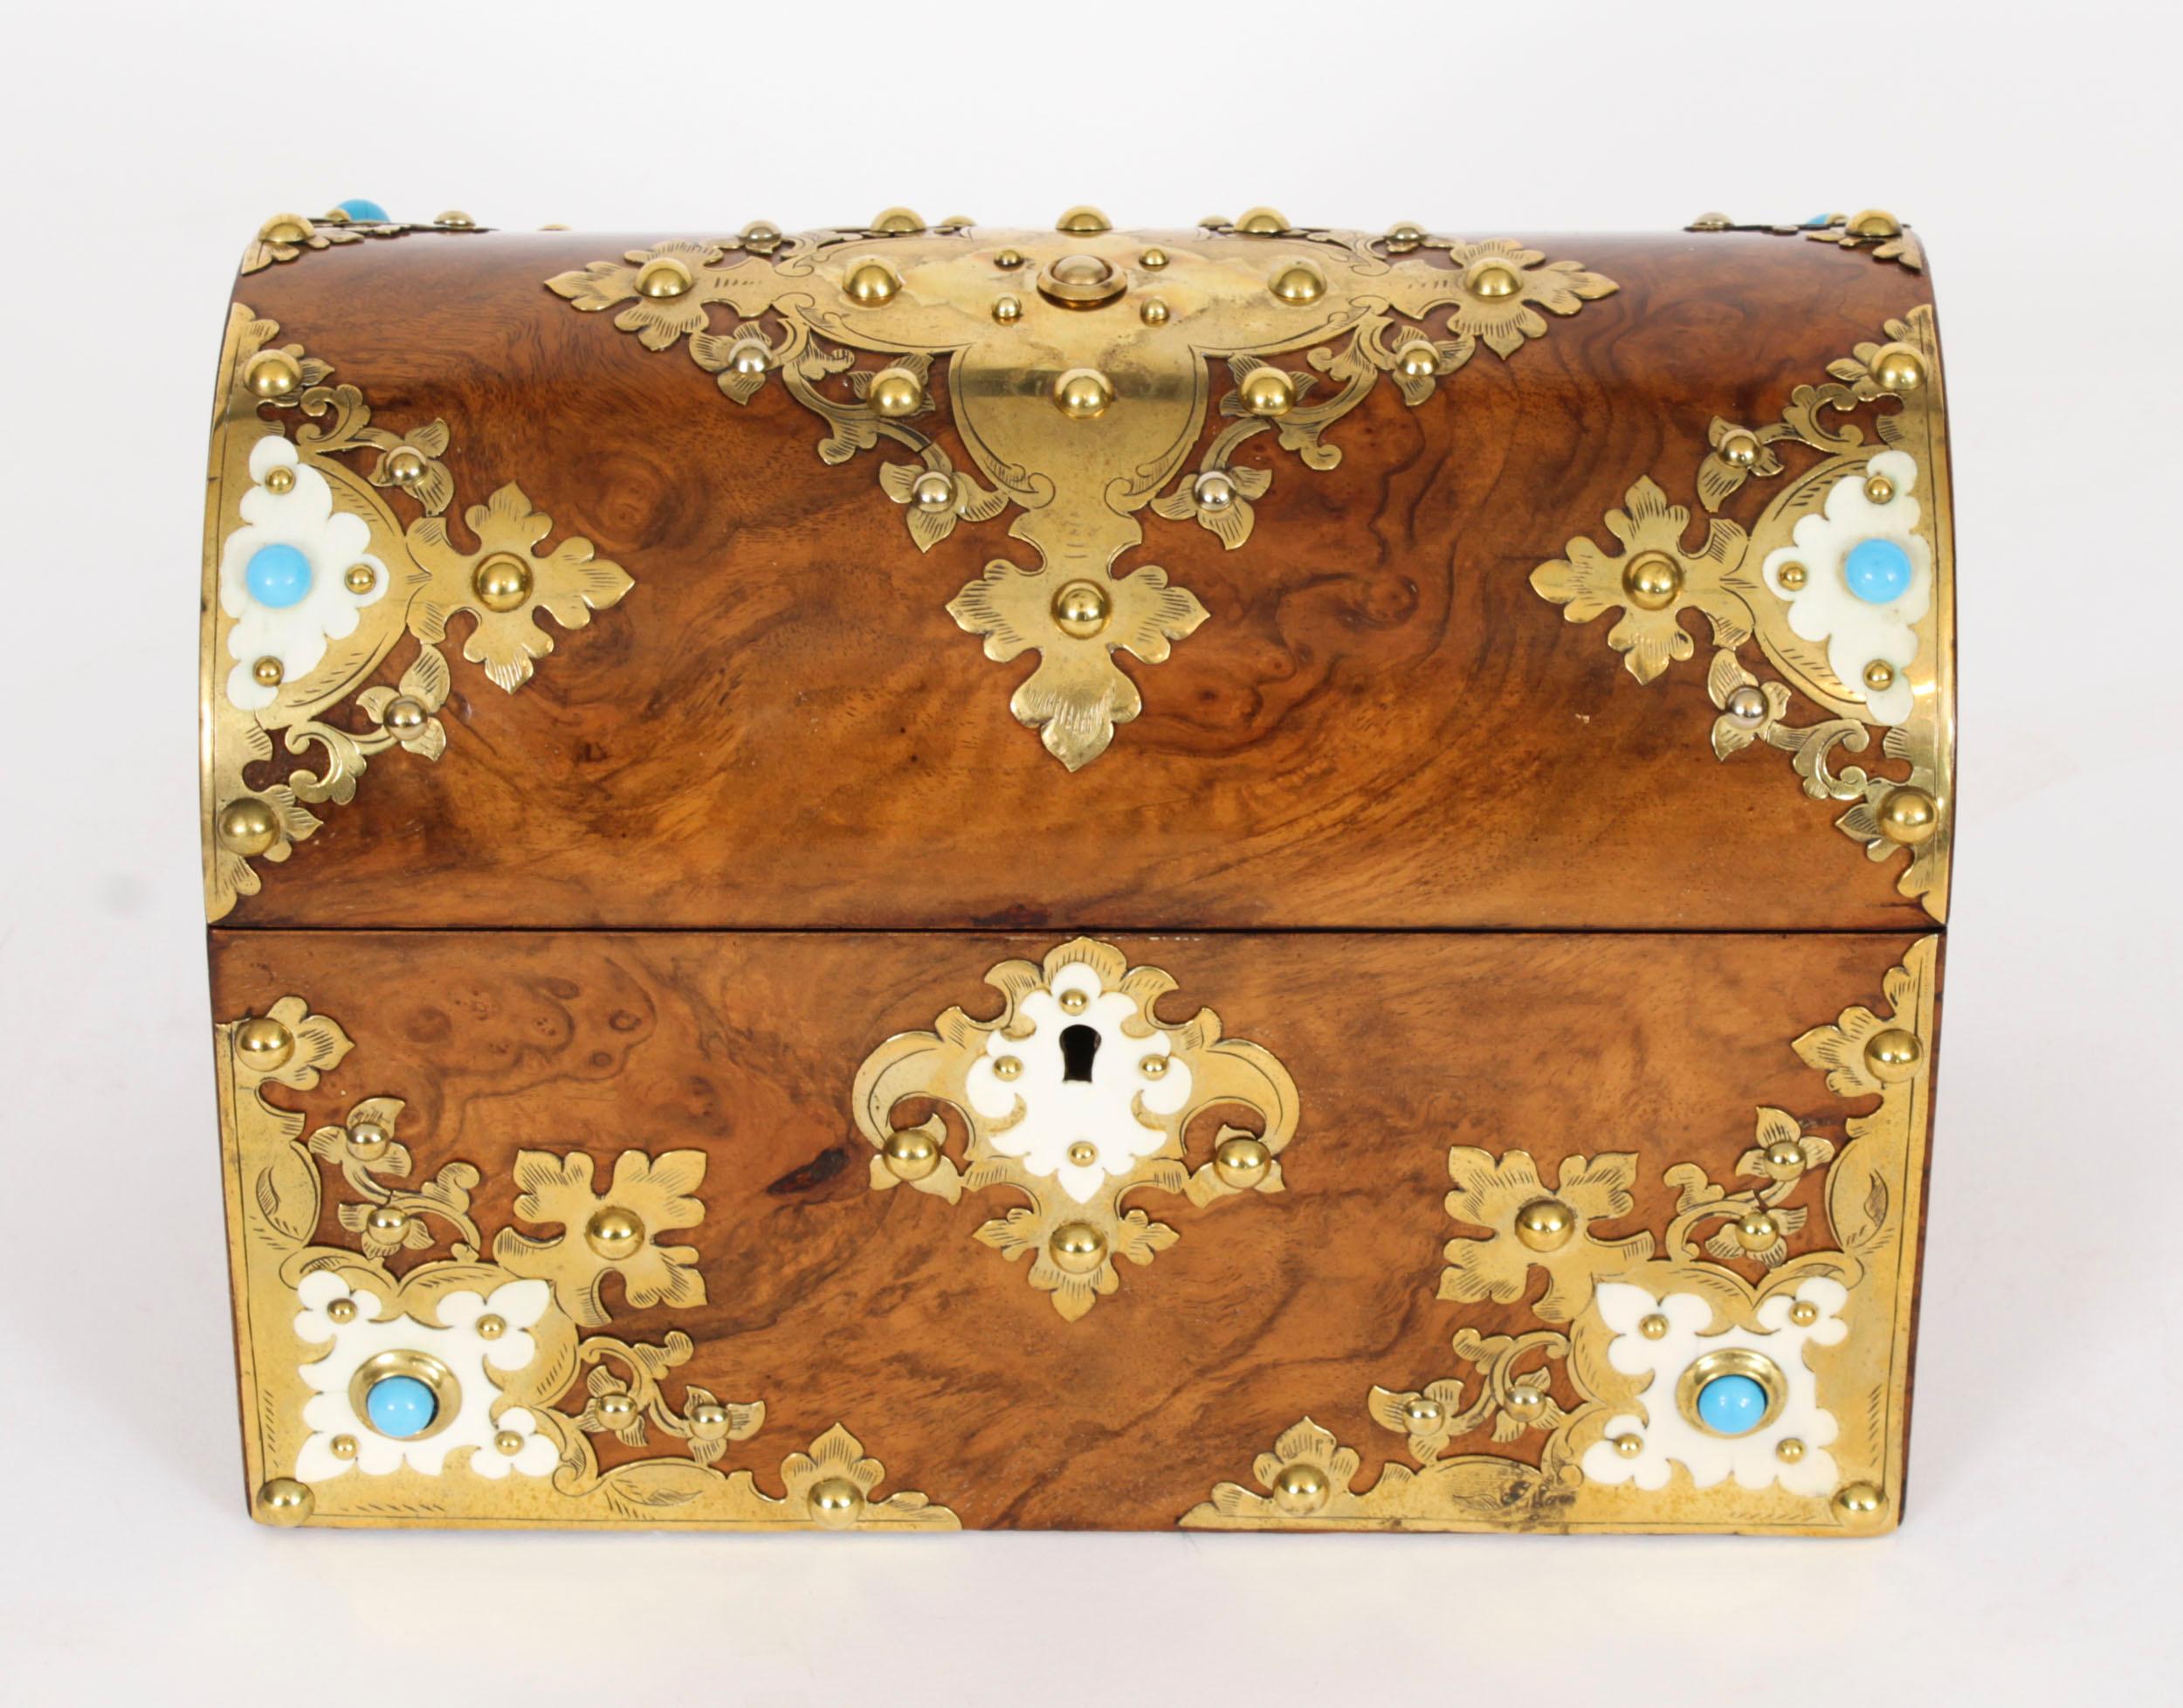 Antique Burr Walnut, Ivorine & Brass Box Domed Casket with Key 19th Century In Good Condition For Sale In London, GB